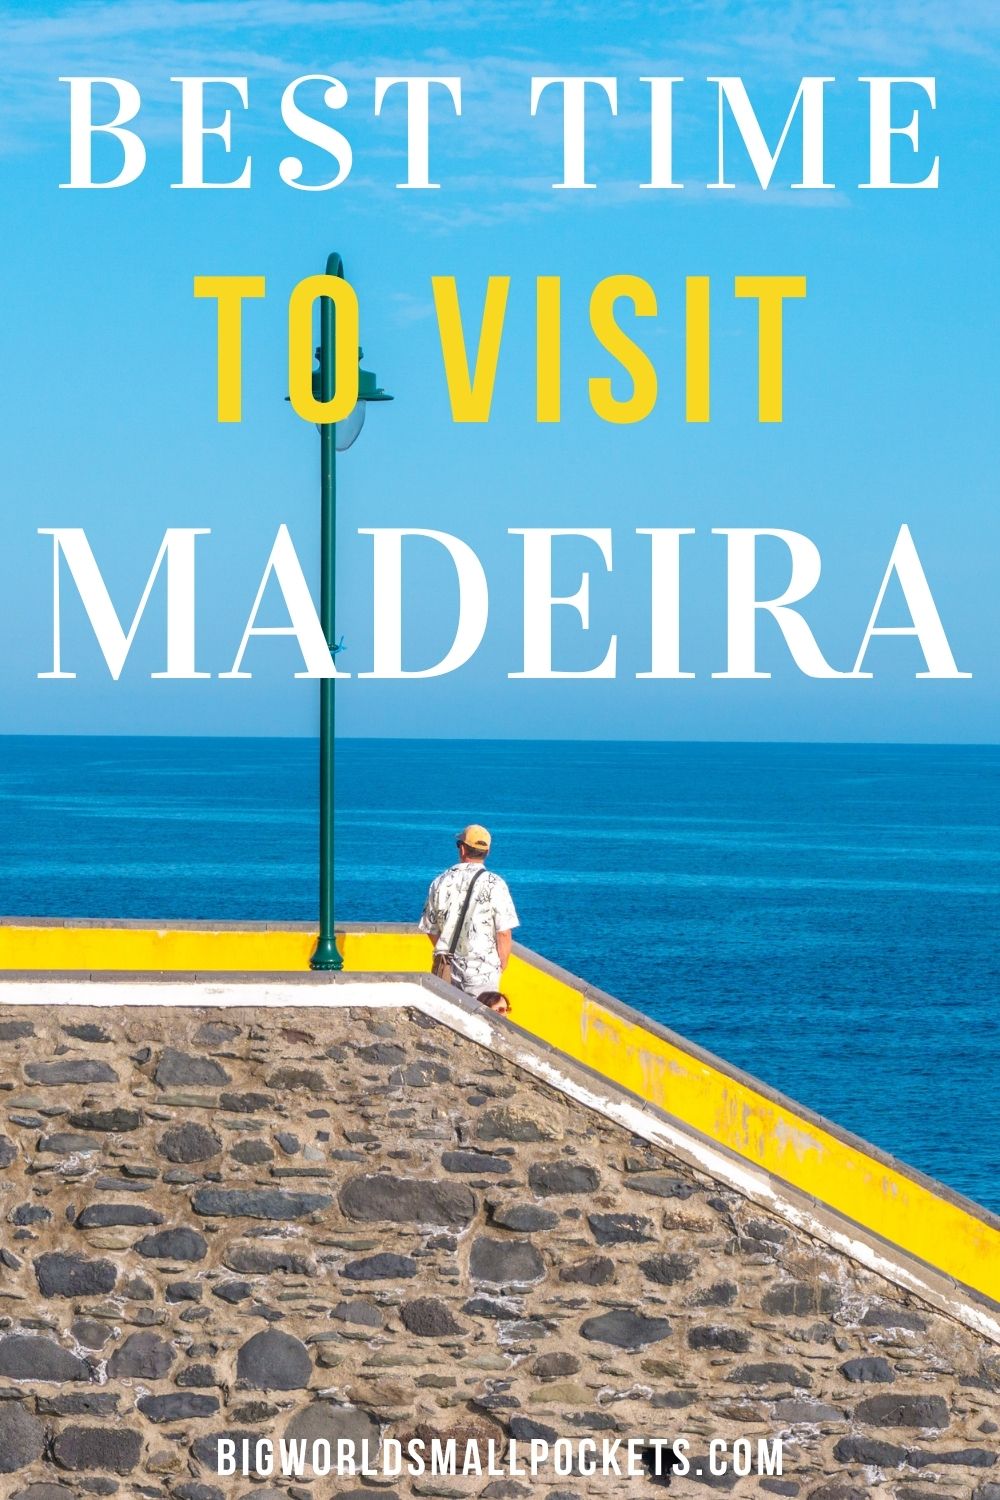 The Best Time to Visit Madeira